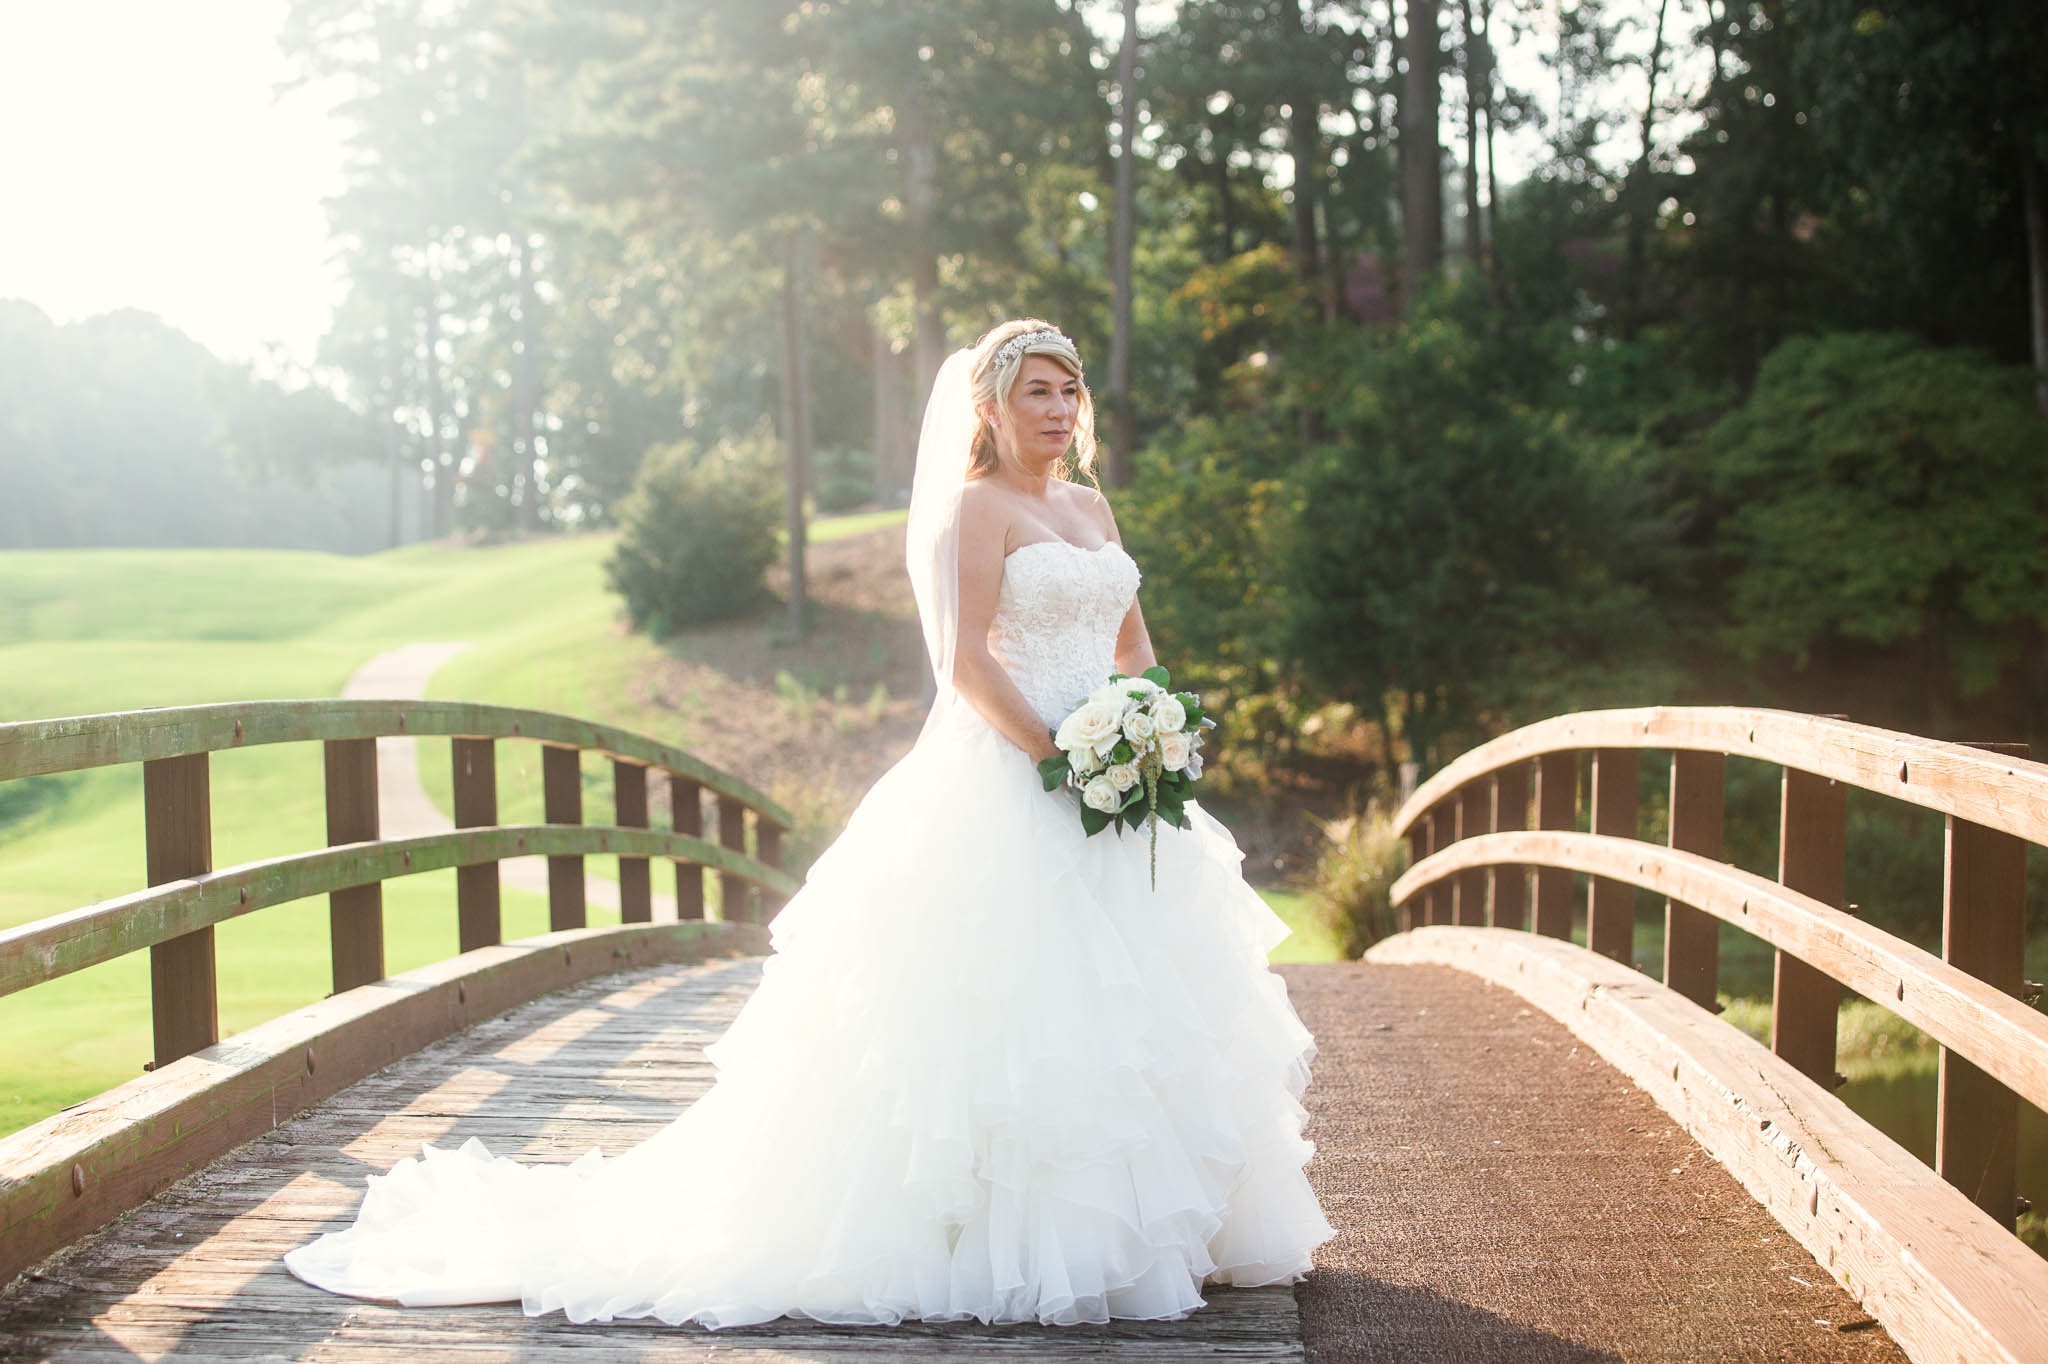 Bridal Portrait - Dona + Doug - MacGregor Downs Country Club in Cary, NC - Raleigh Wedding Photographer